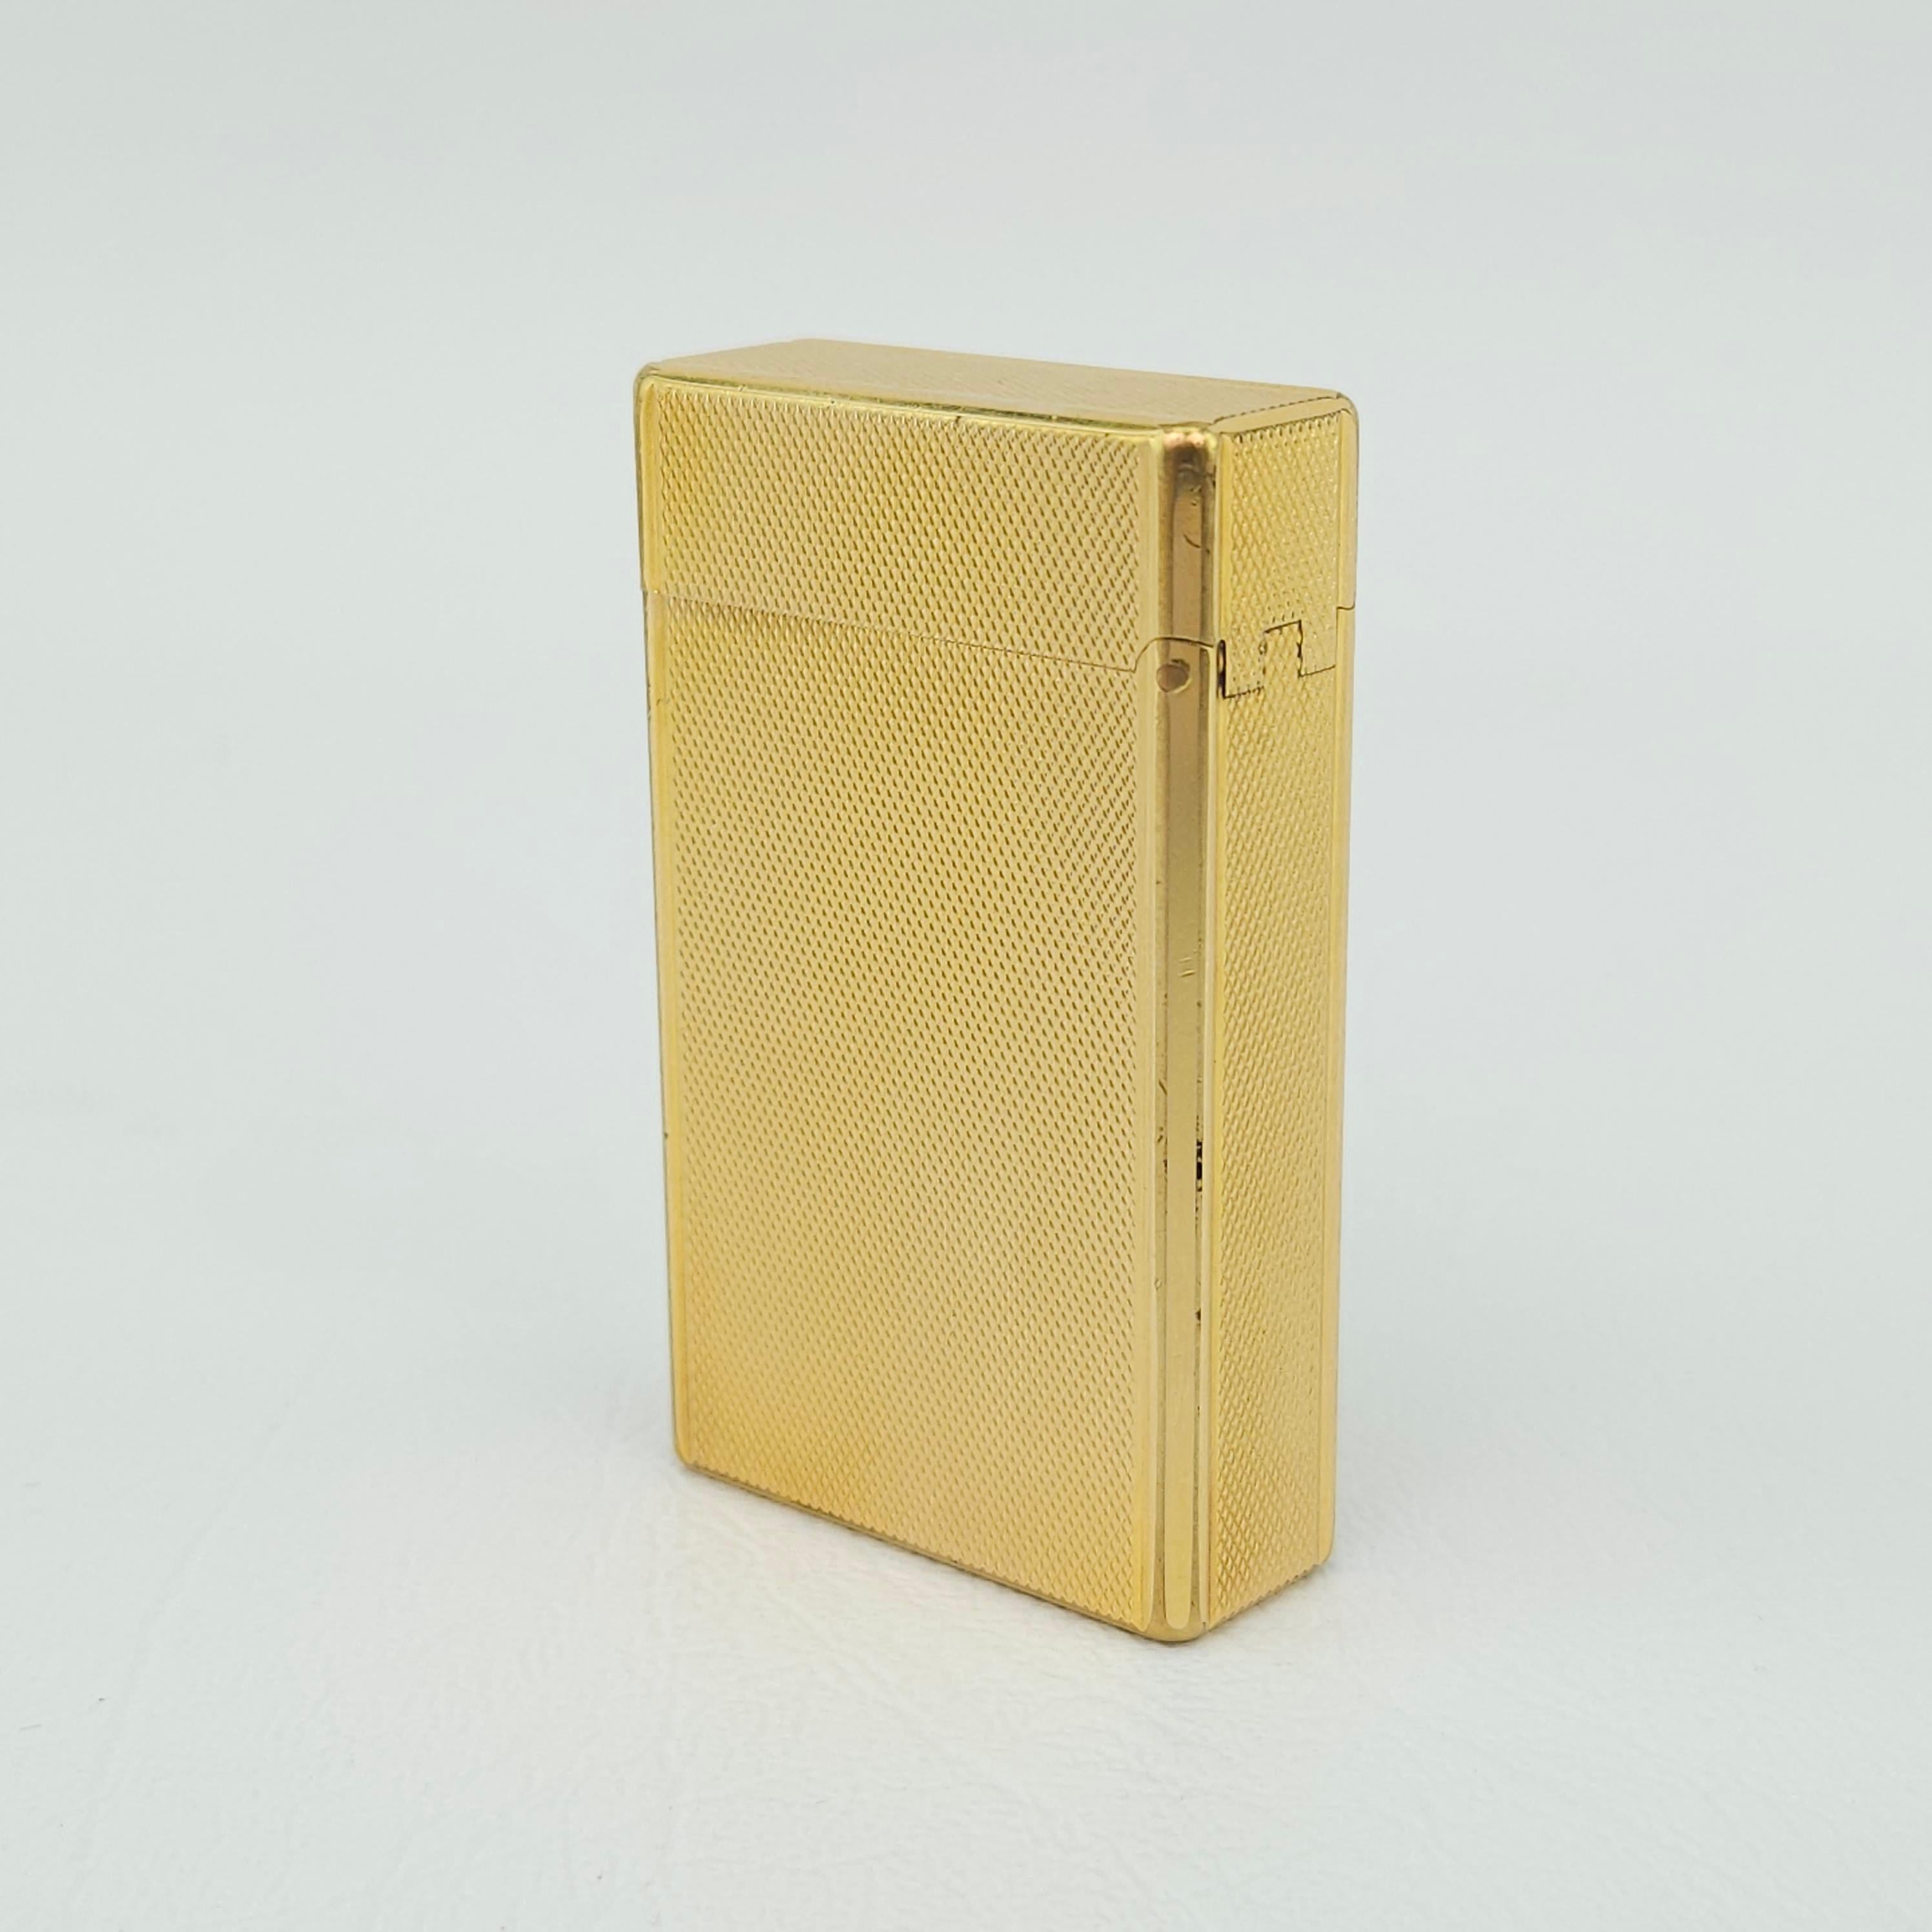 Vintage Gold-Plated Pocket Gas Lighter By S. T. Dupont, Paris.  Like new condition and doesn't appear to have ever have been used.  